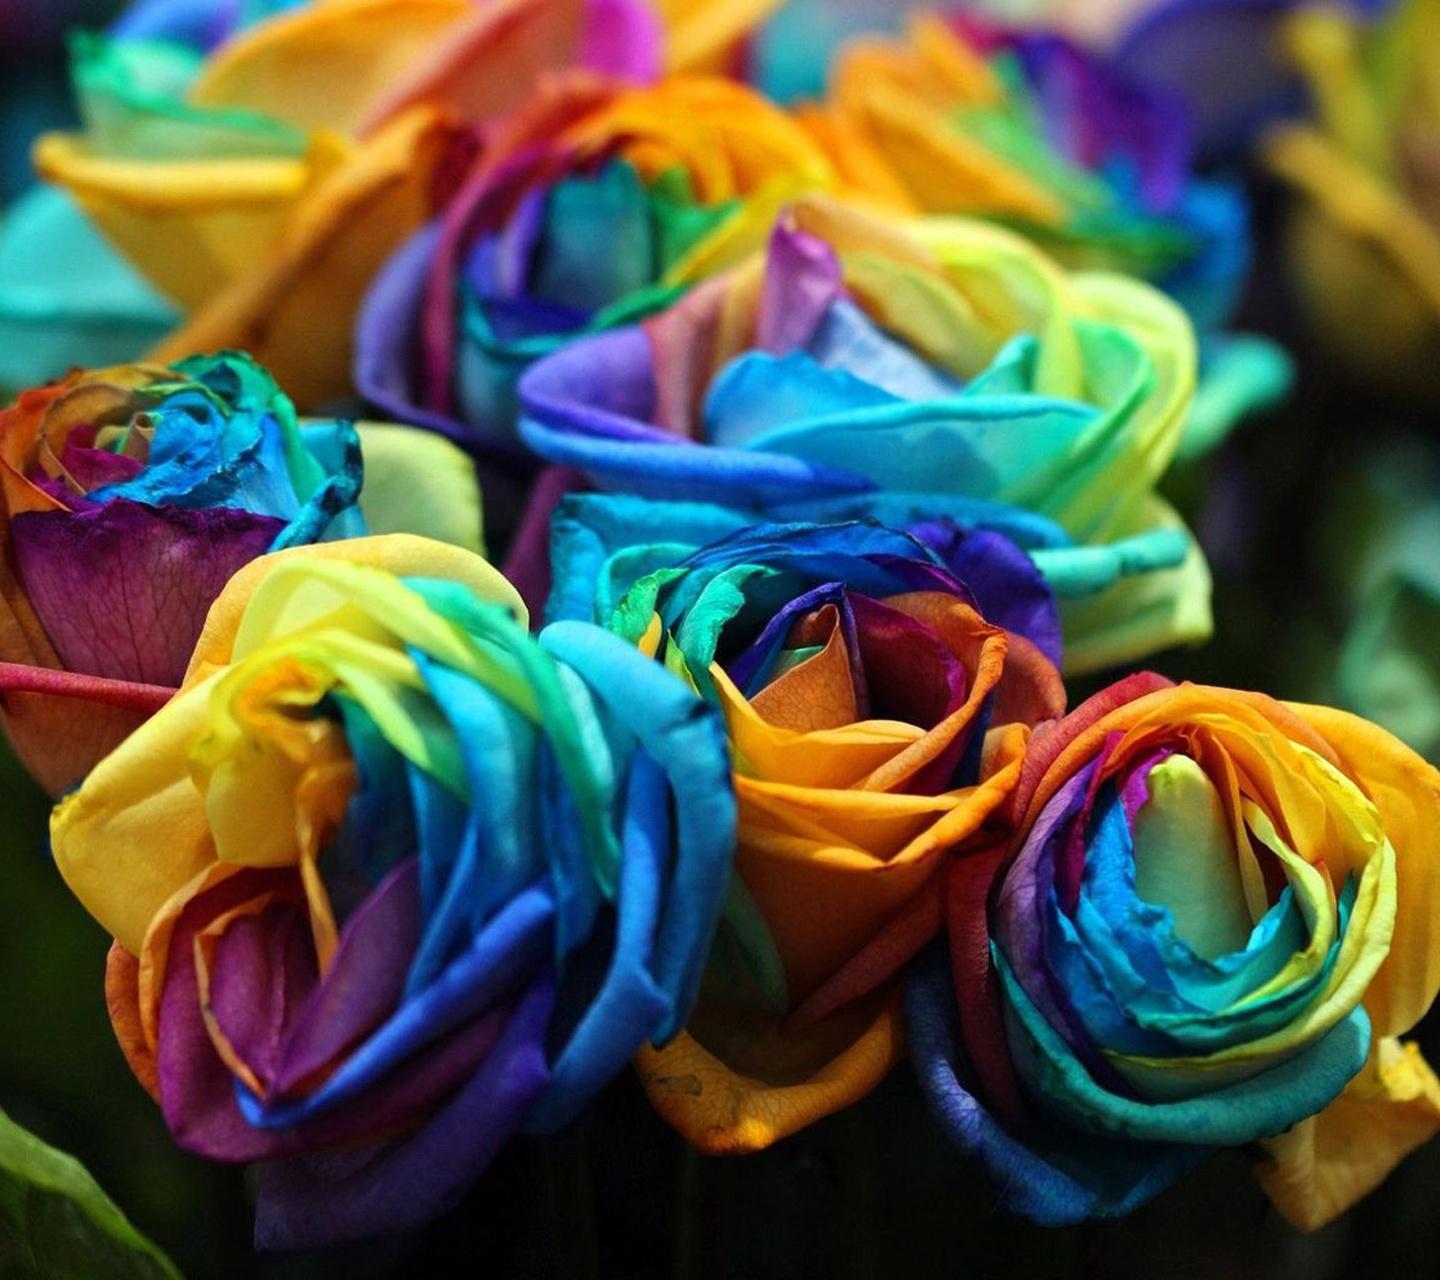 Colourful Roses Hd Wallpapers For Mobile